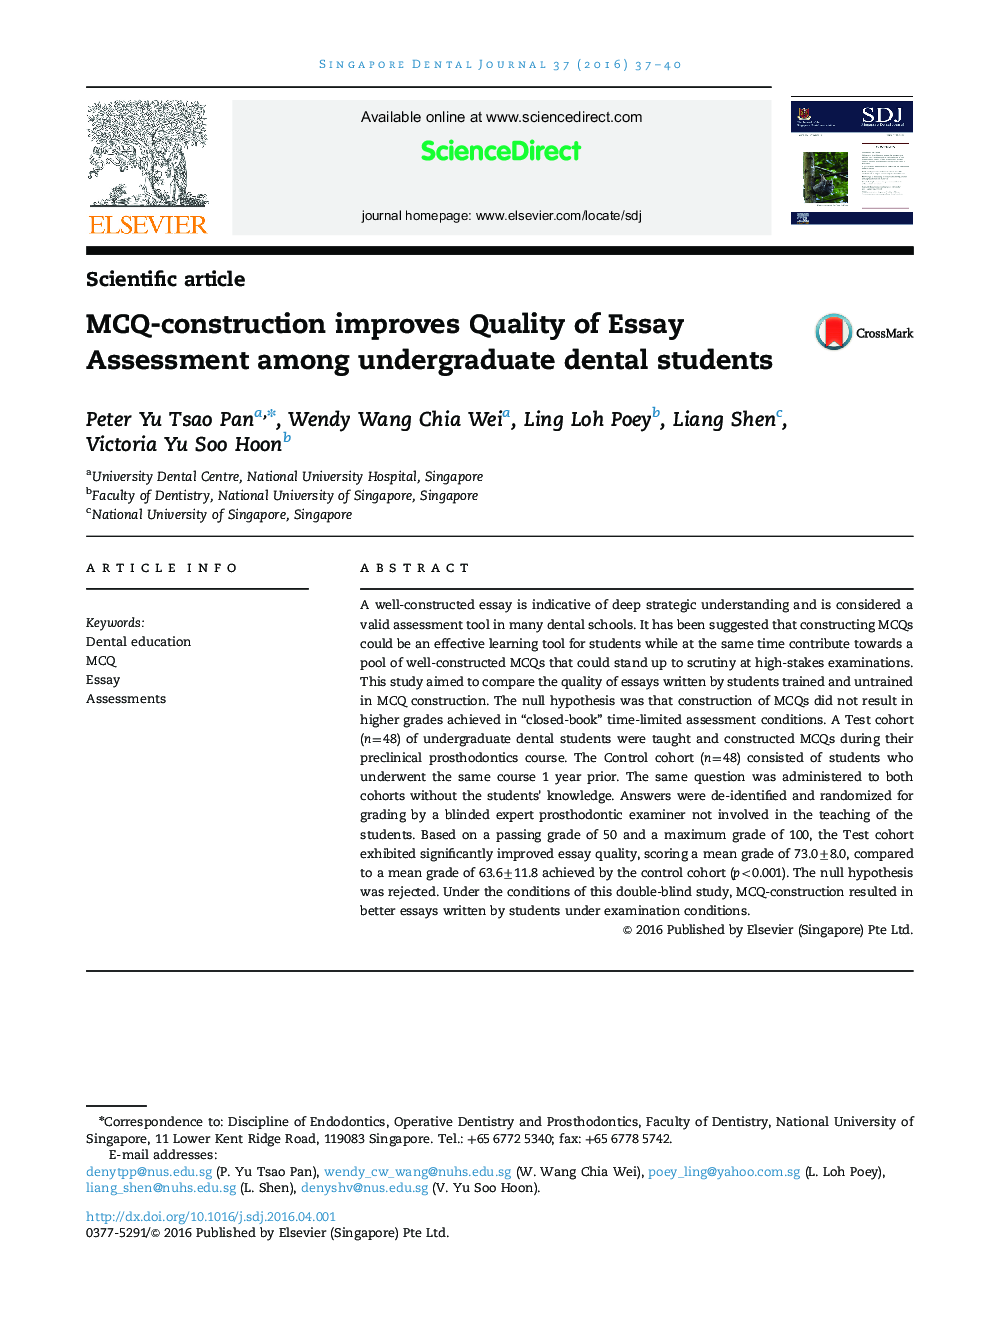 MCQ-construction improves Quality of Essay Assessment among undergraduate dental students